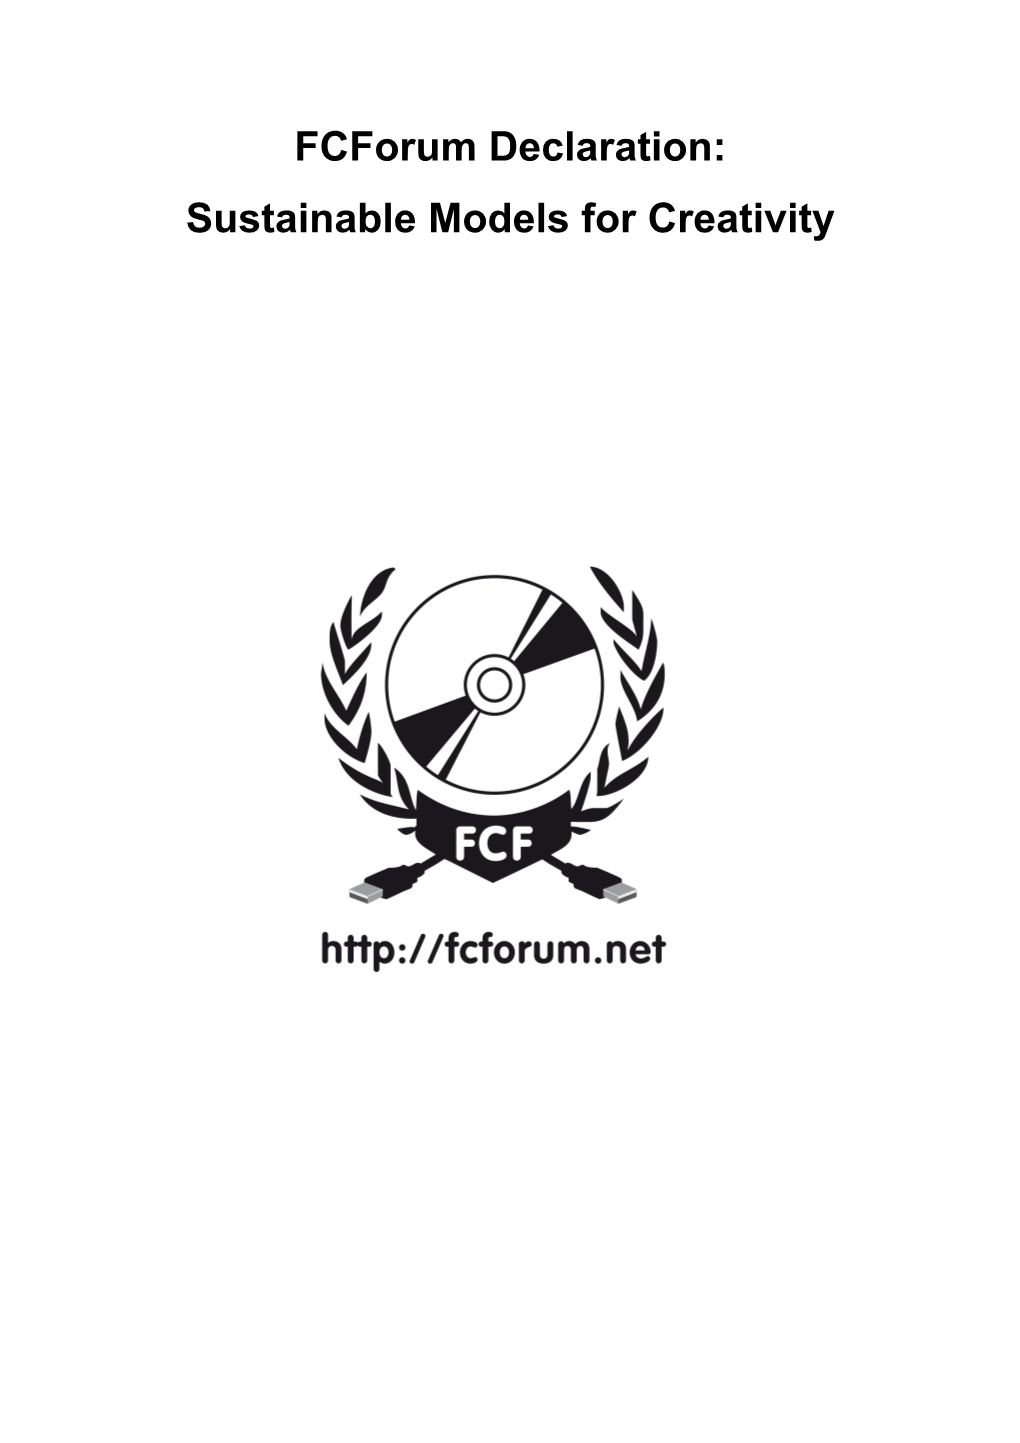 Sustainable Models for Creativity